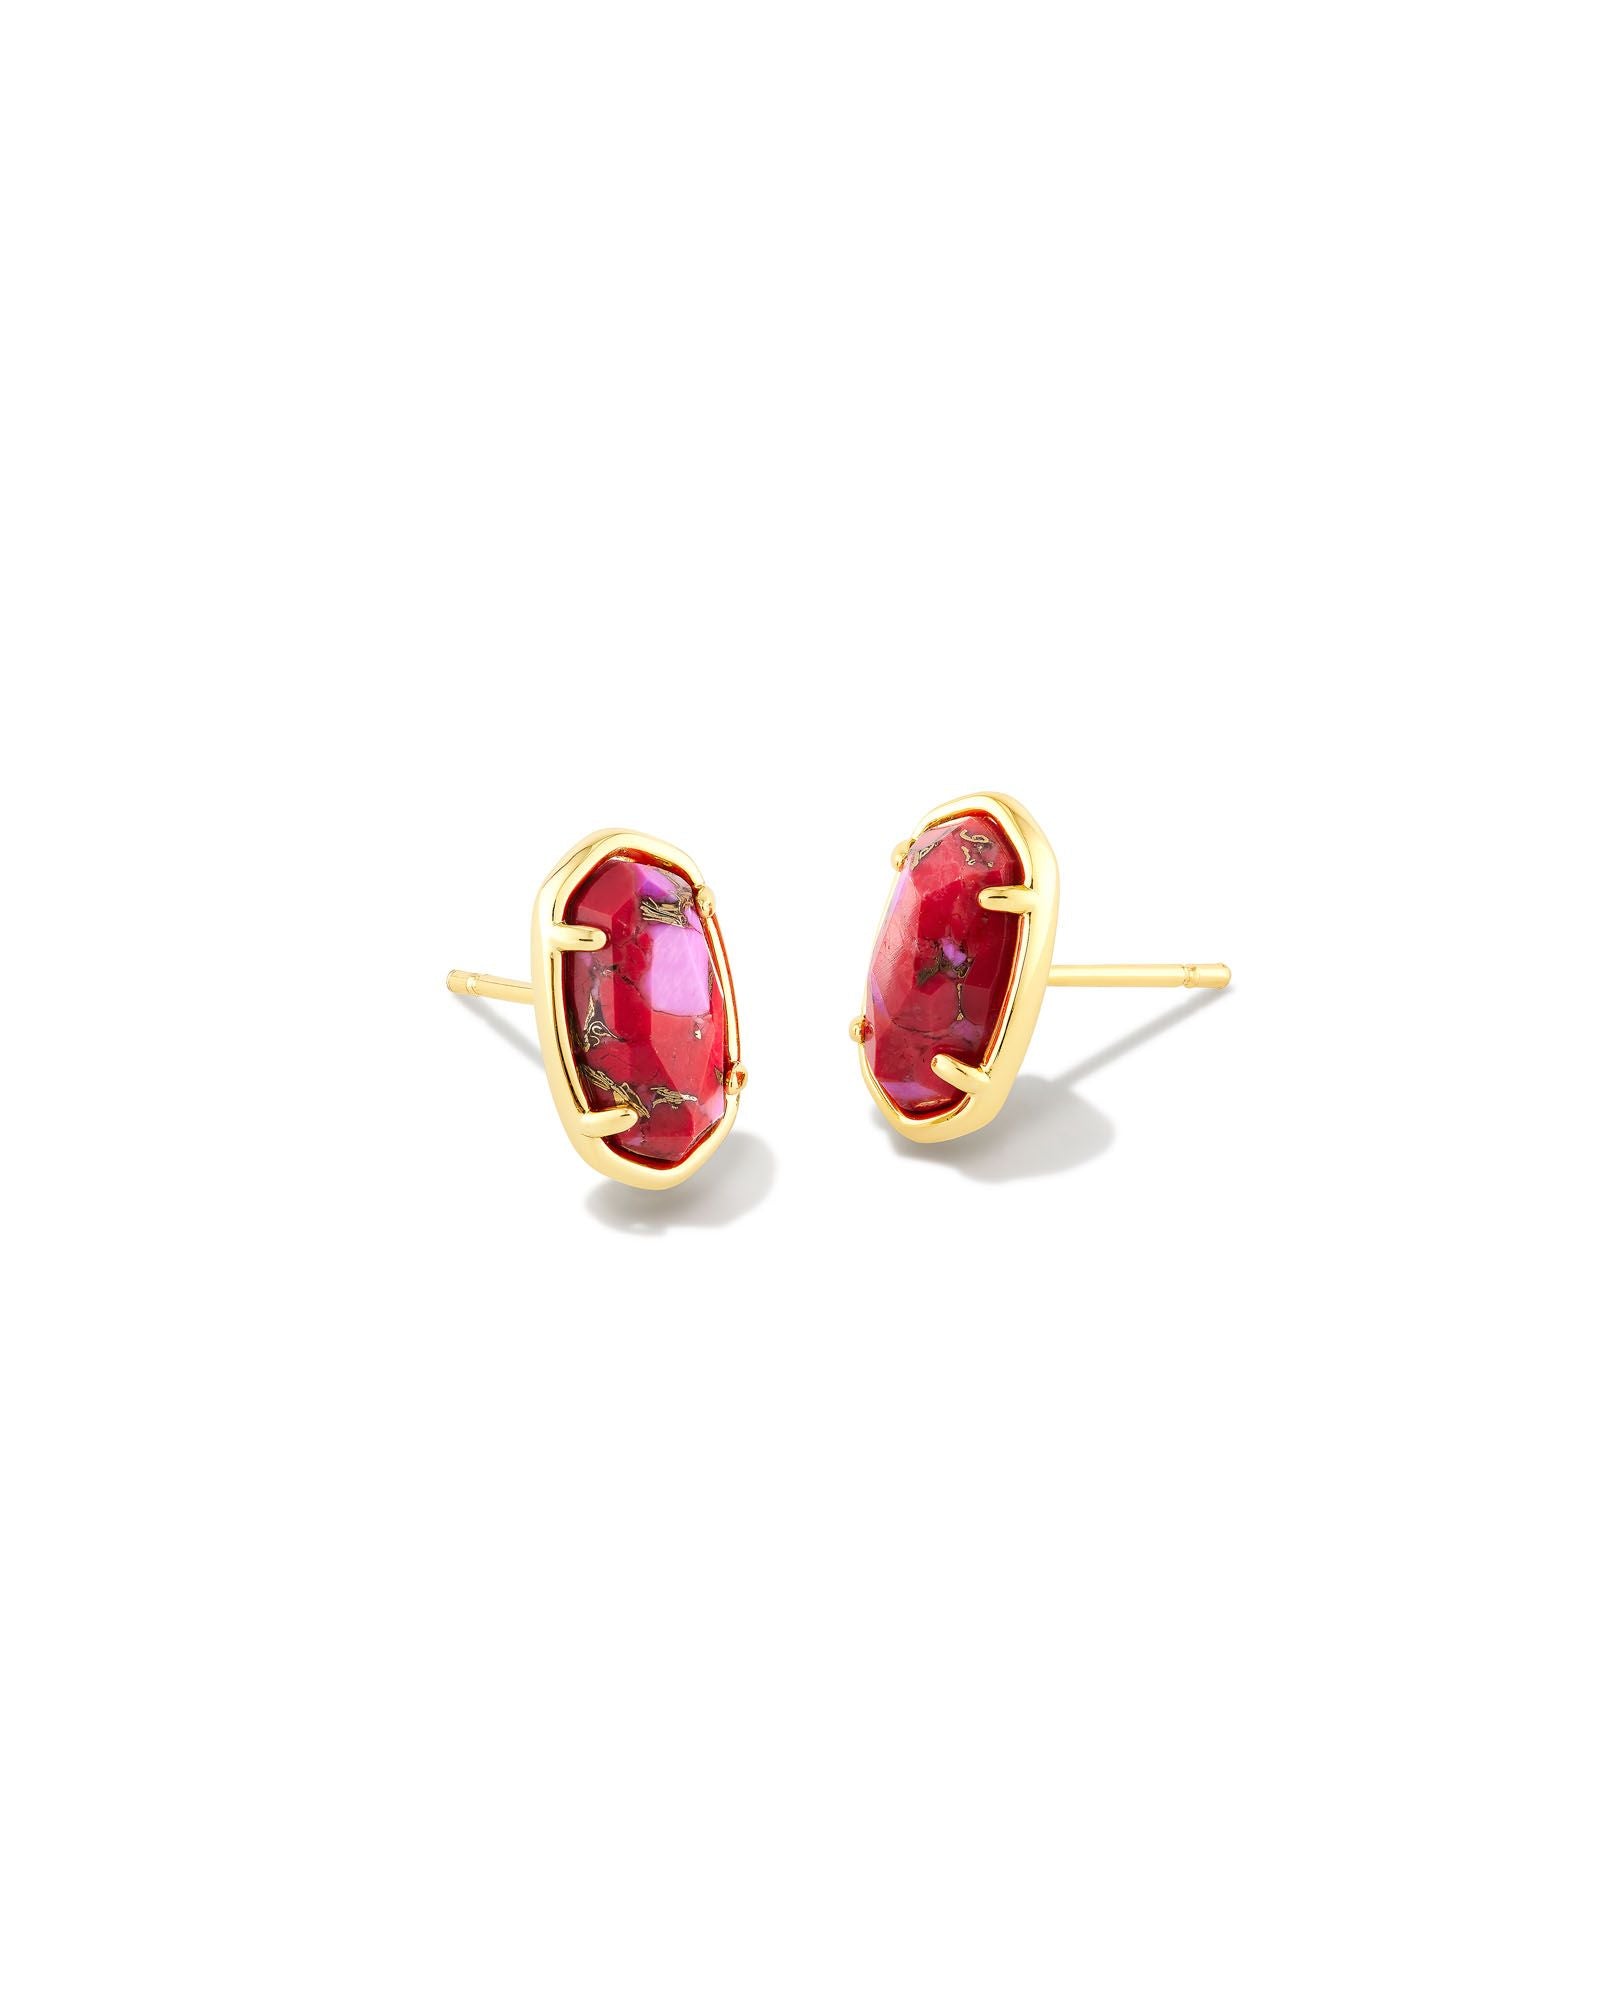 Grayson Stone Stud Earring in Gold Bronze Veined Red and Fuchsia Magnesite